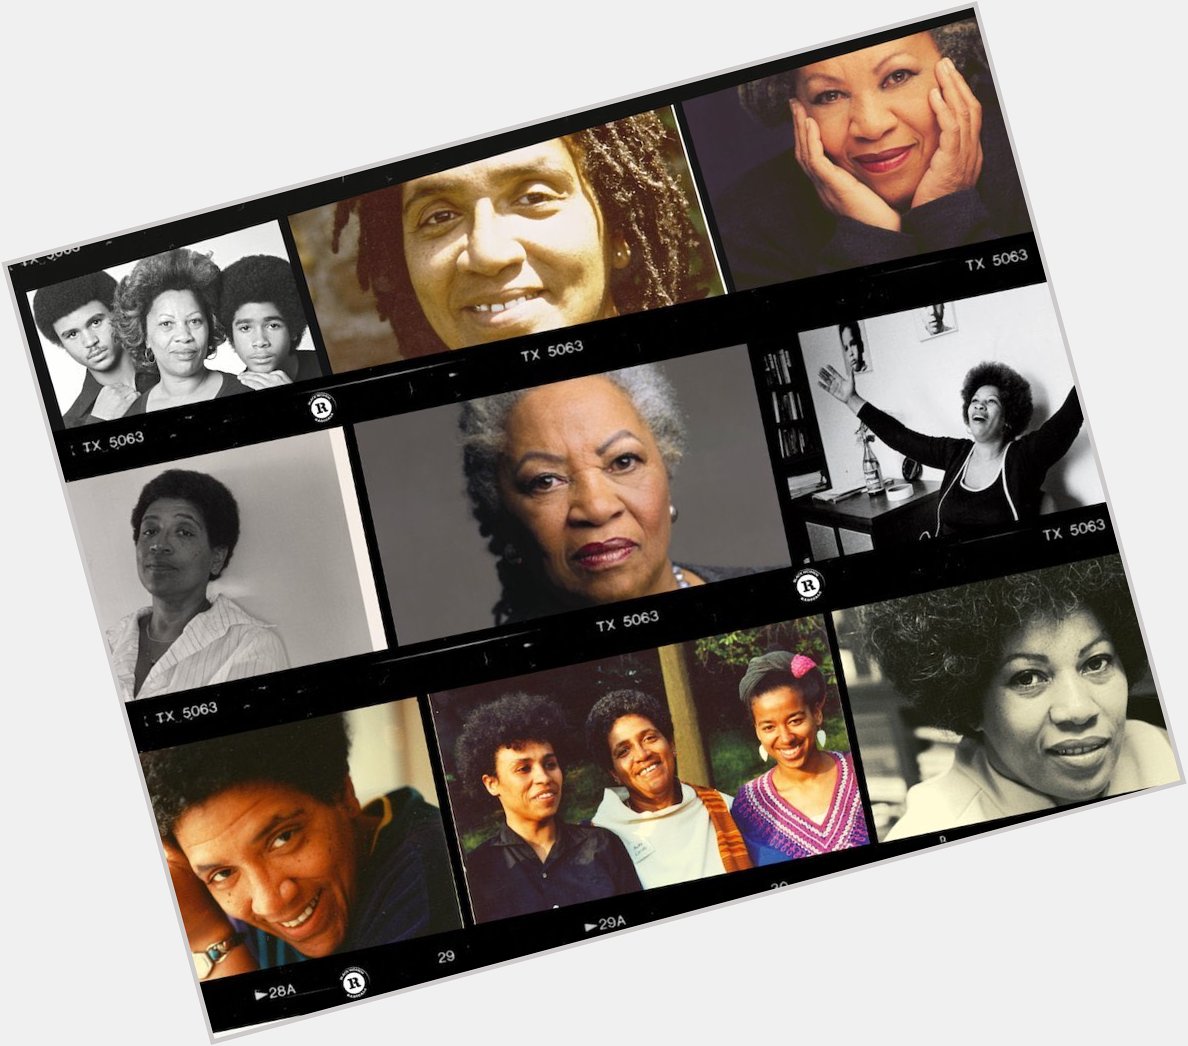 Feb. 18 should be a federal holiday for all Black women. Happy birthday to the giants Audre Lorde and Toni Morrison. 